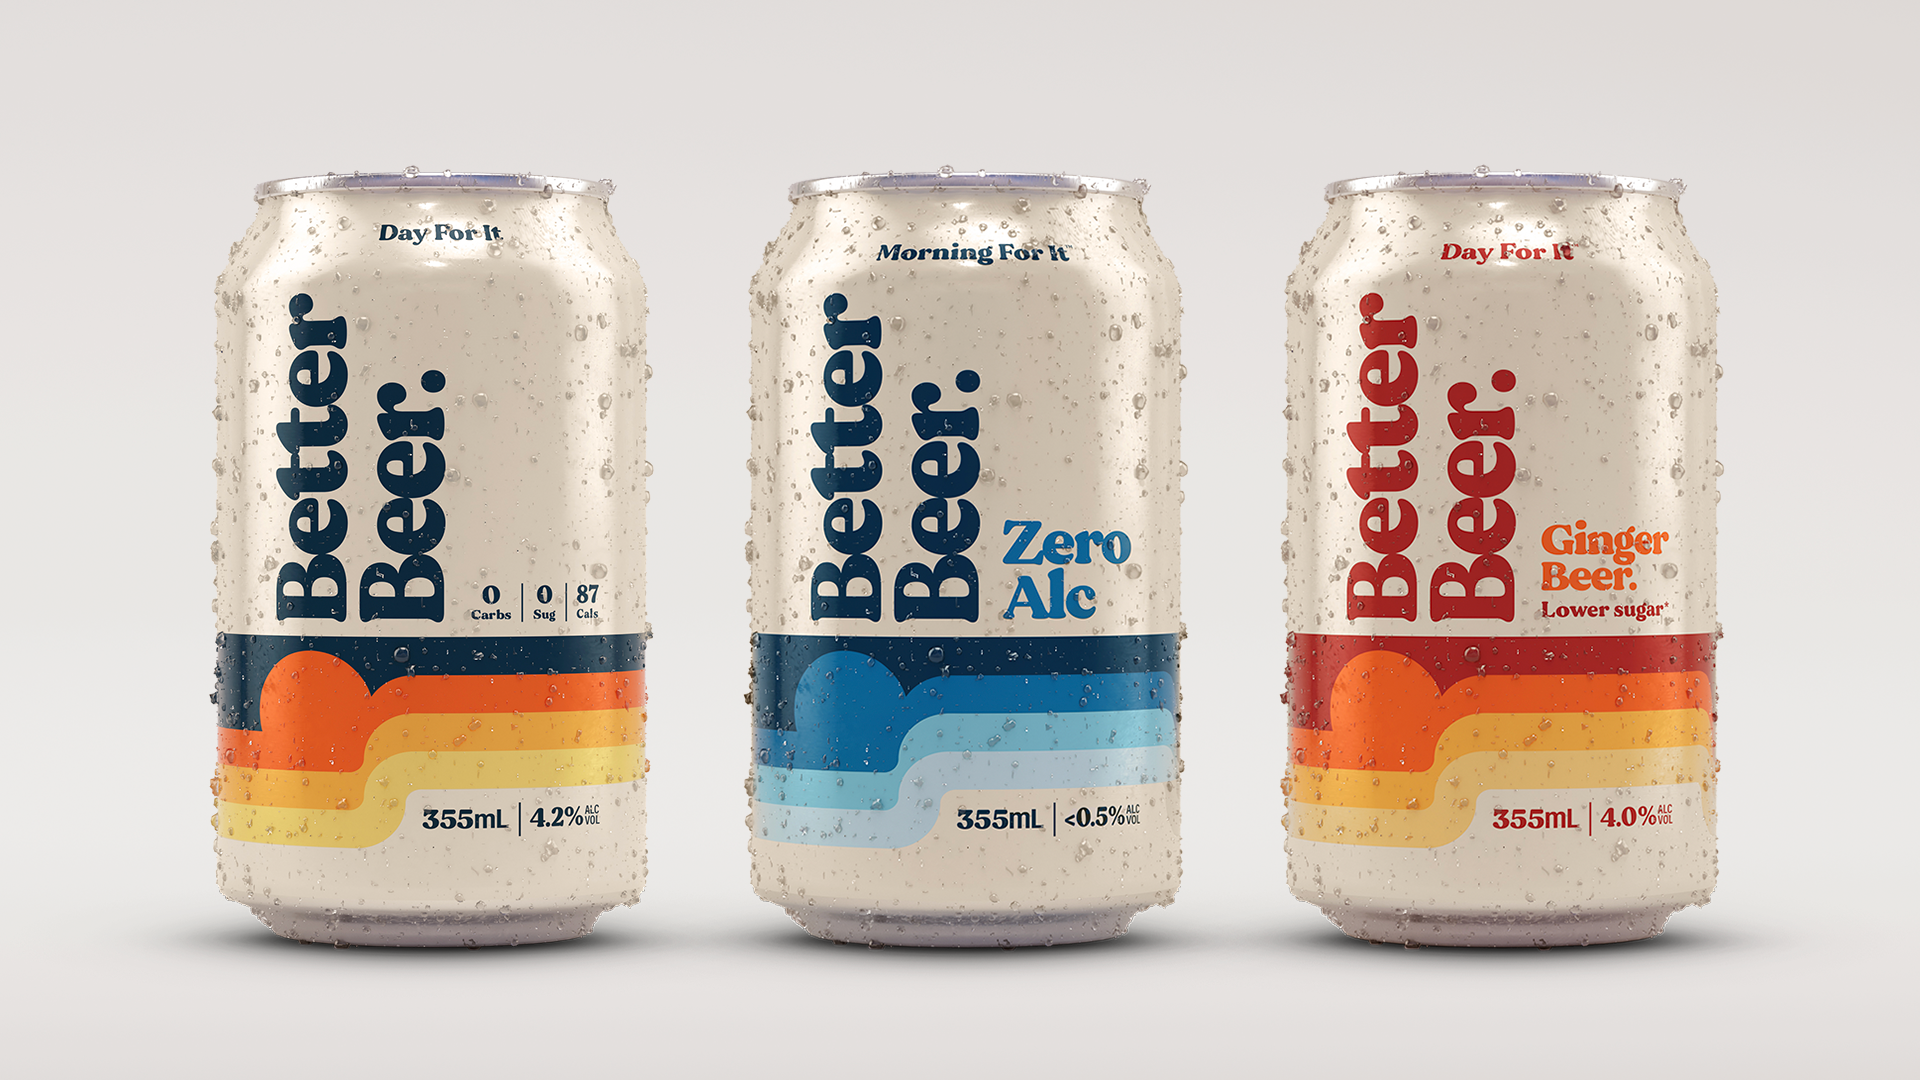 The designs of the Better Beer Range including Zero Alc and Ginger Beer in can packaging